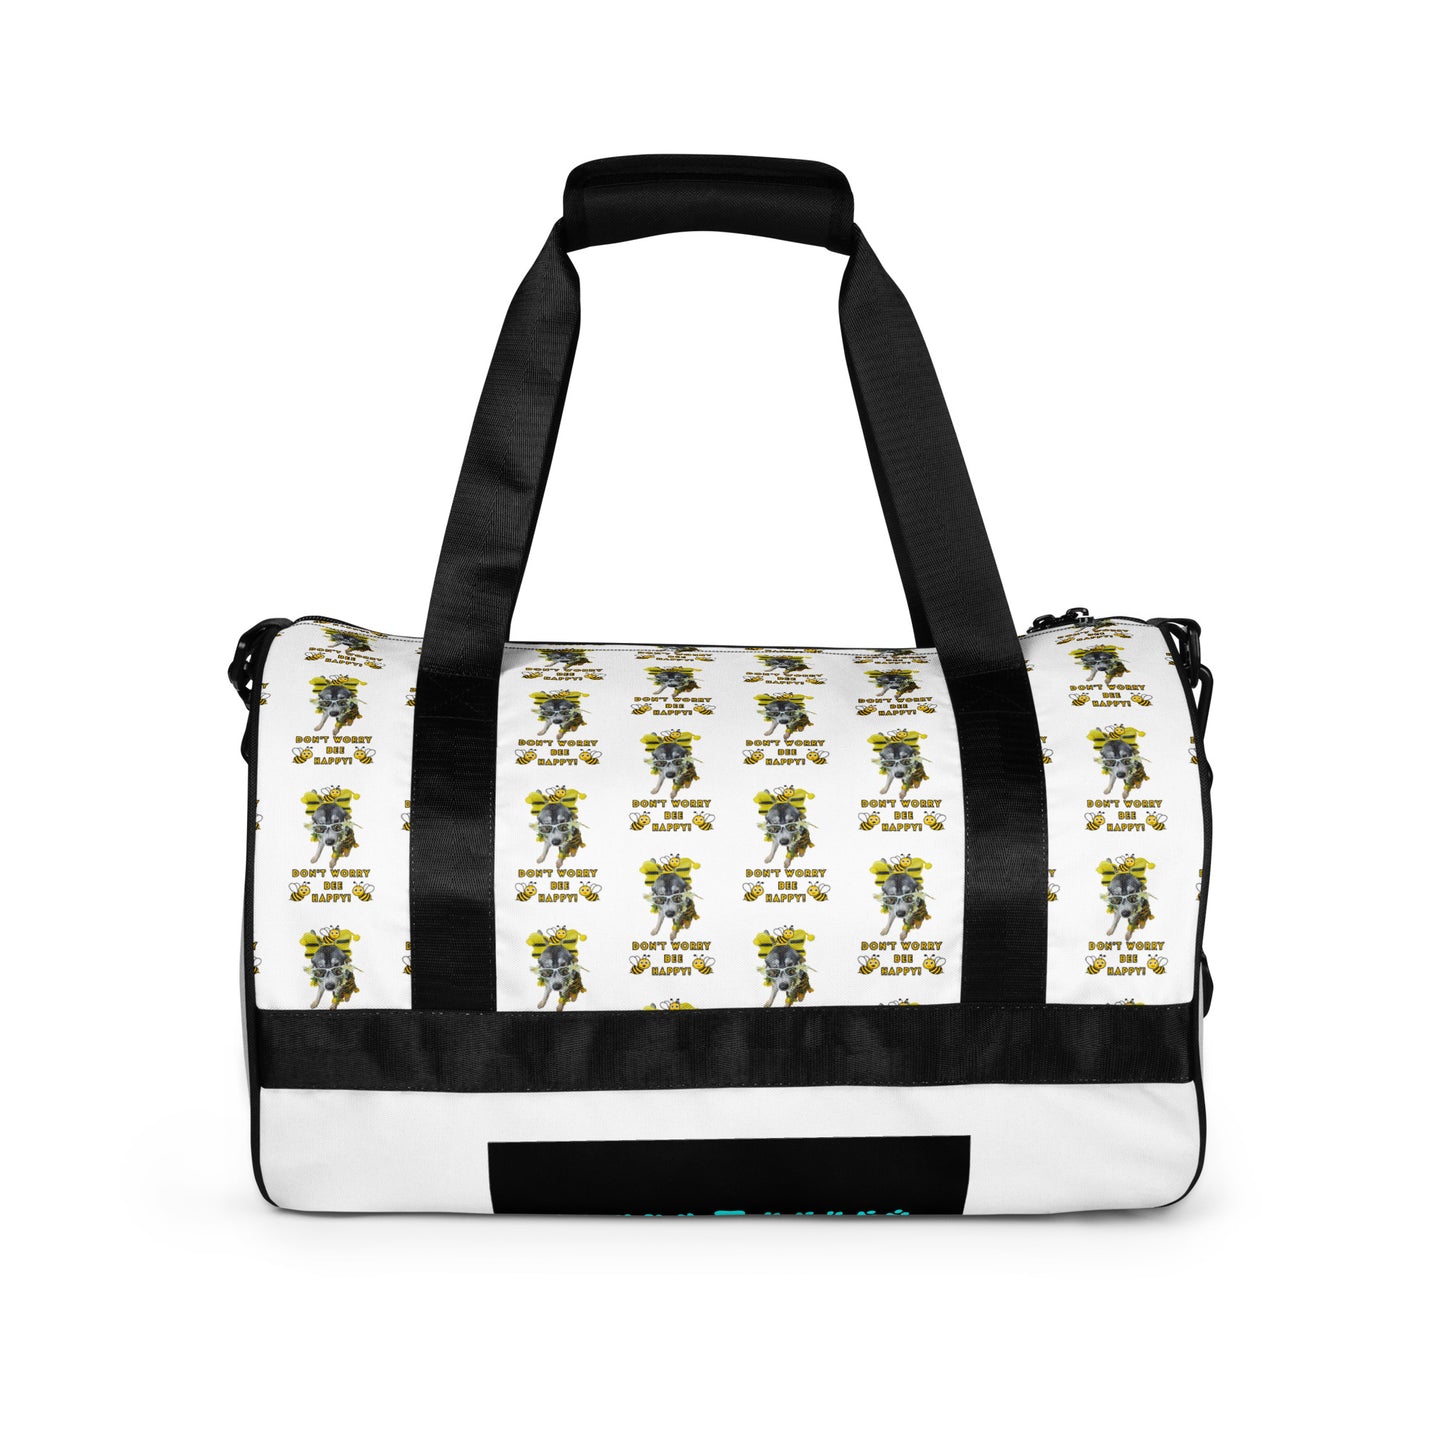 Bee Happy- All-over print gym bag